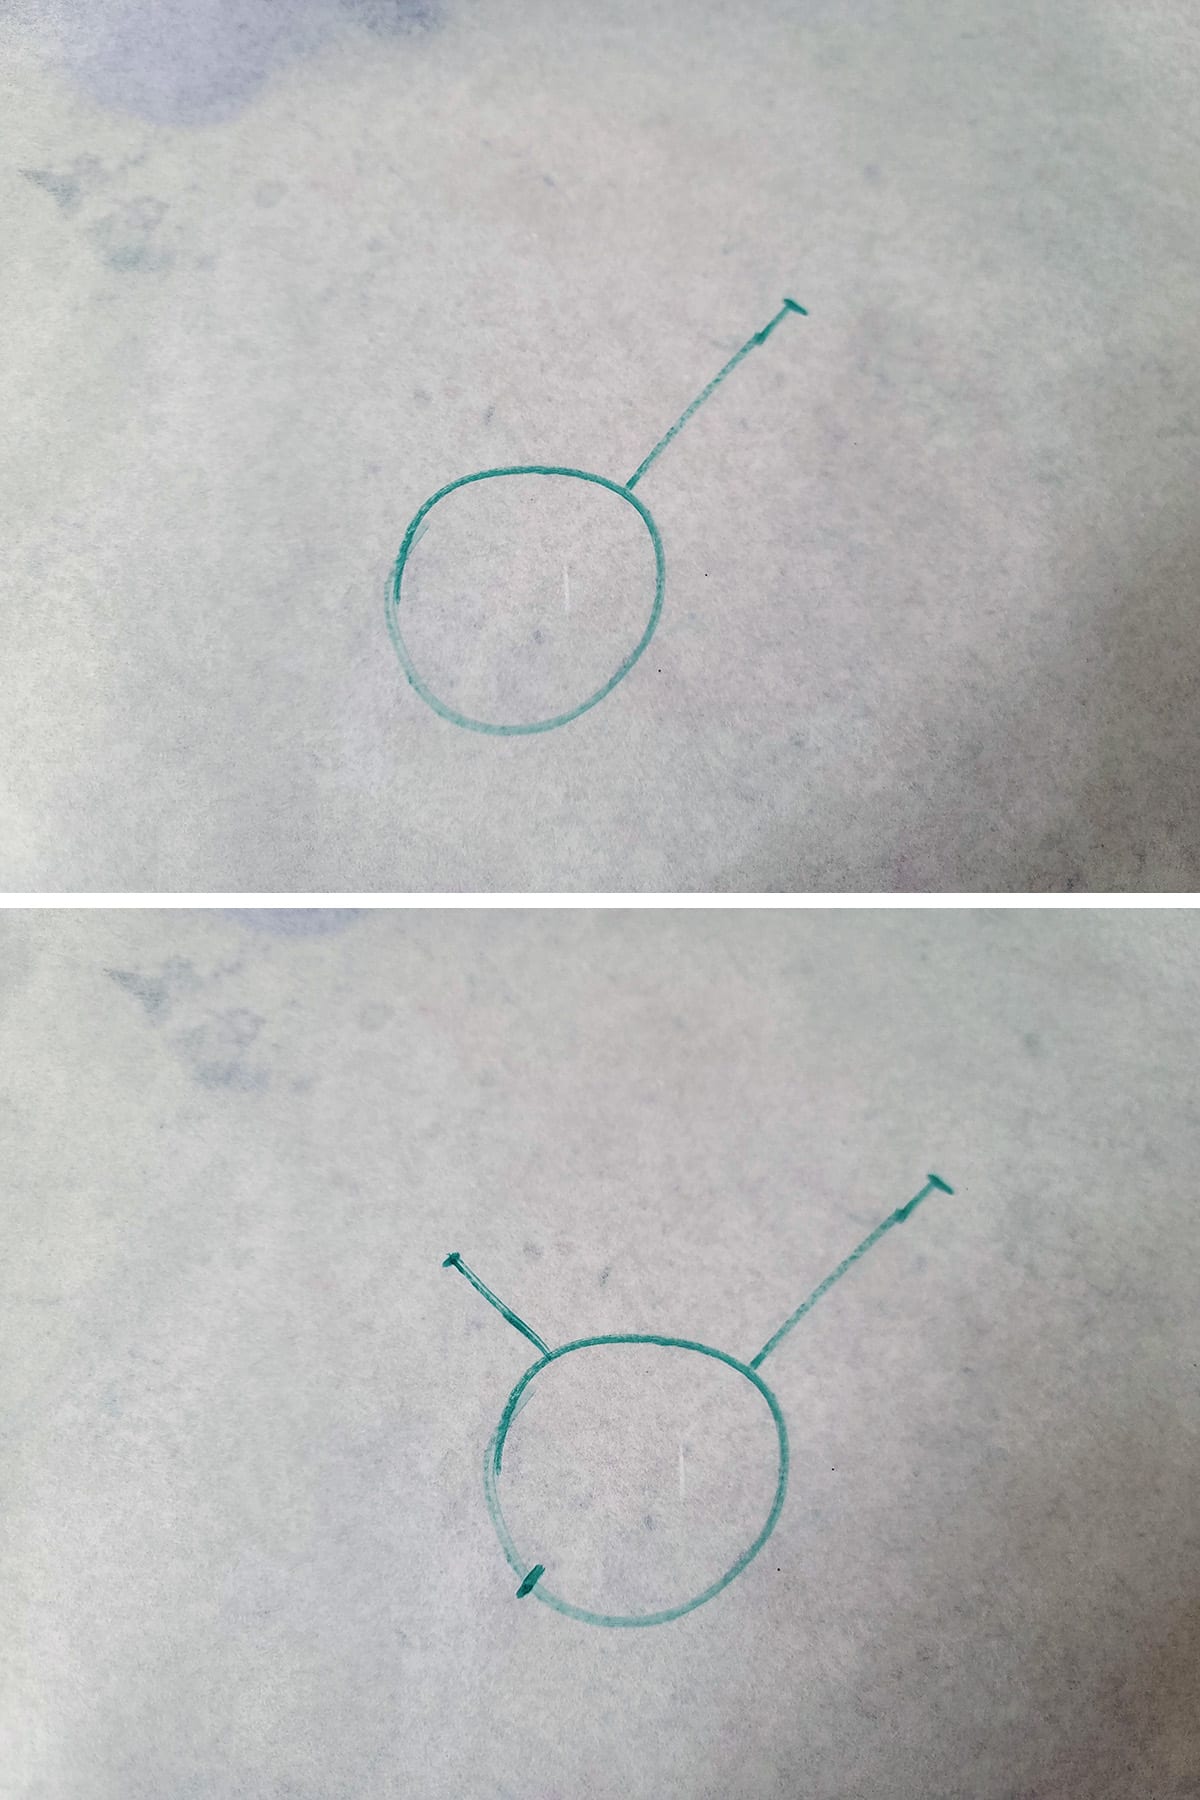 A 2 part image showing a circle with 2 lines extending from it, as described.